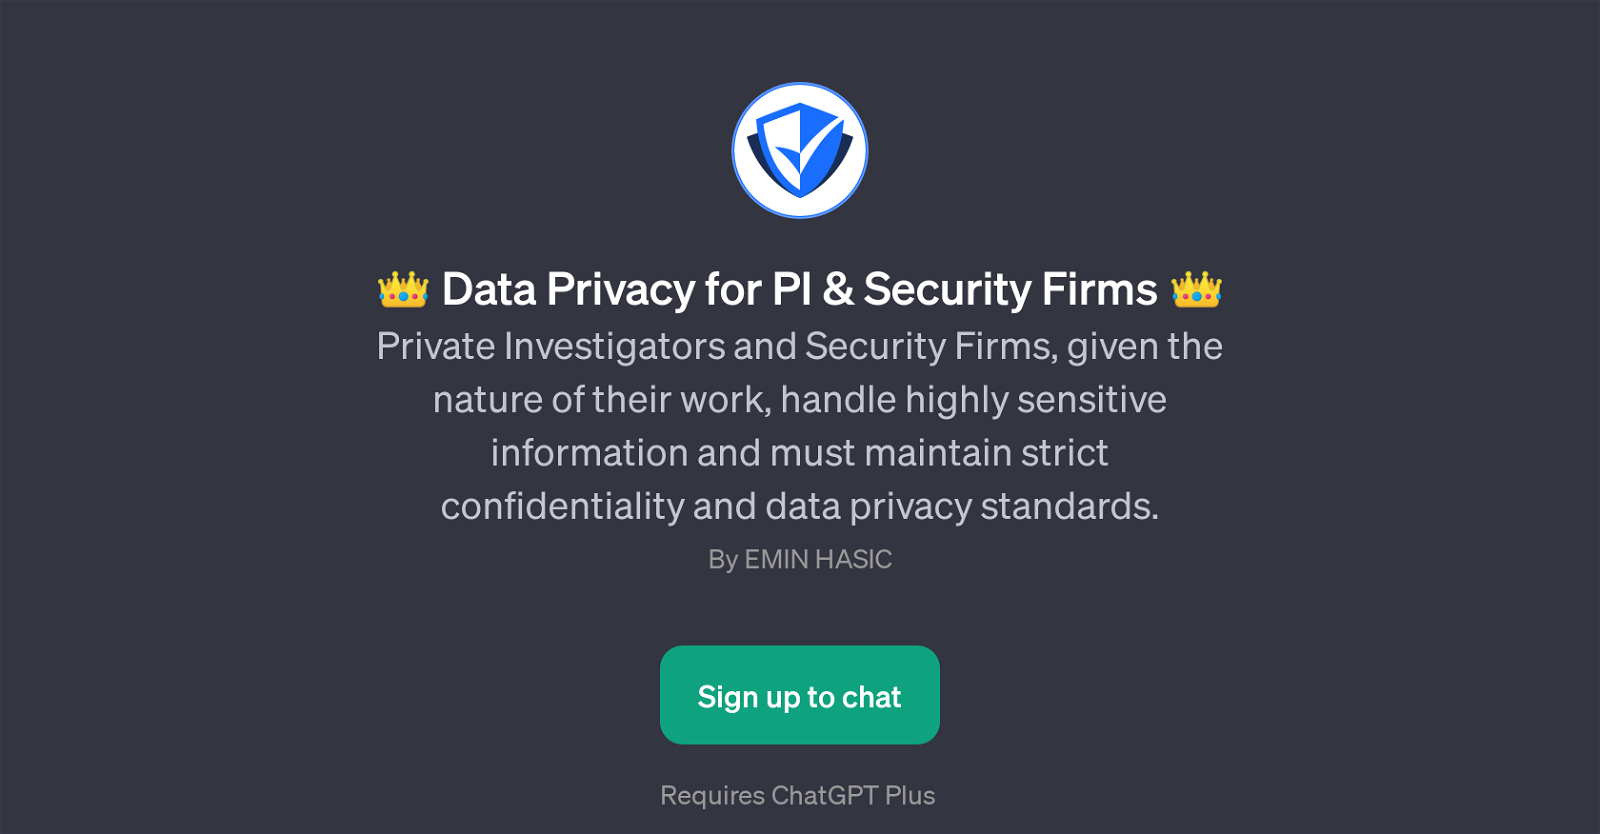 Data Privacy for PI & Security Firms website